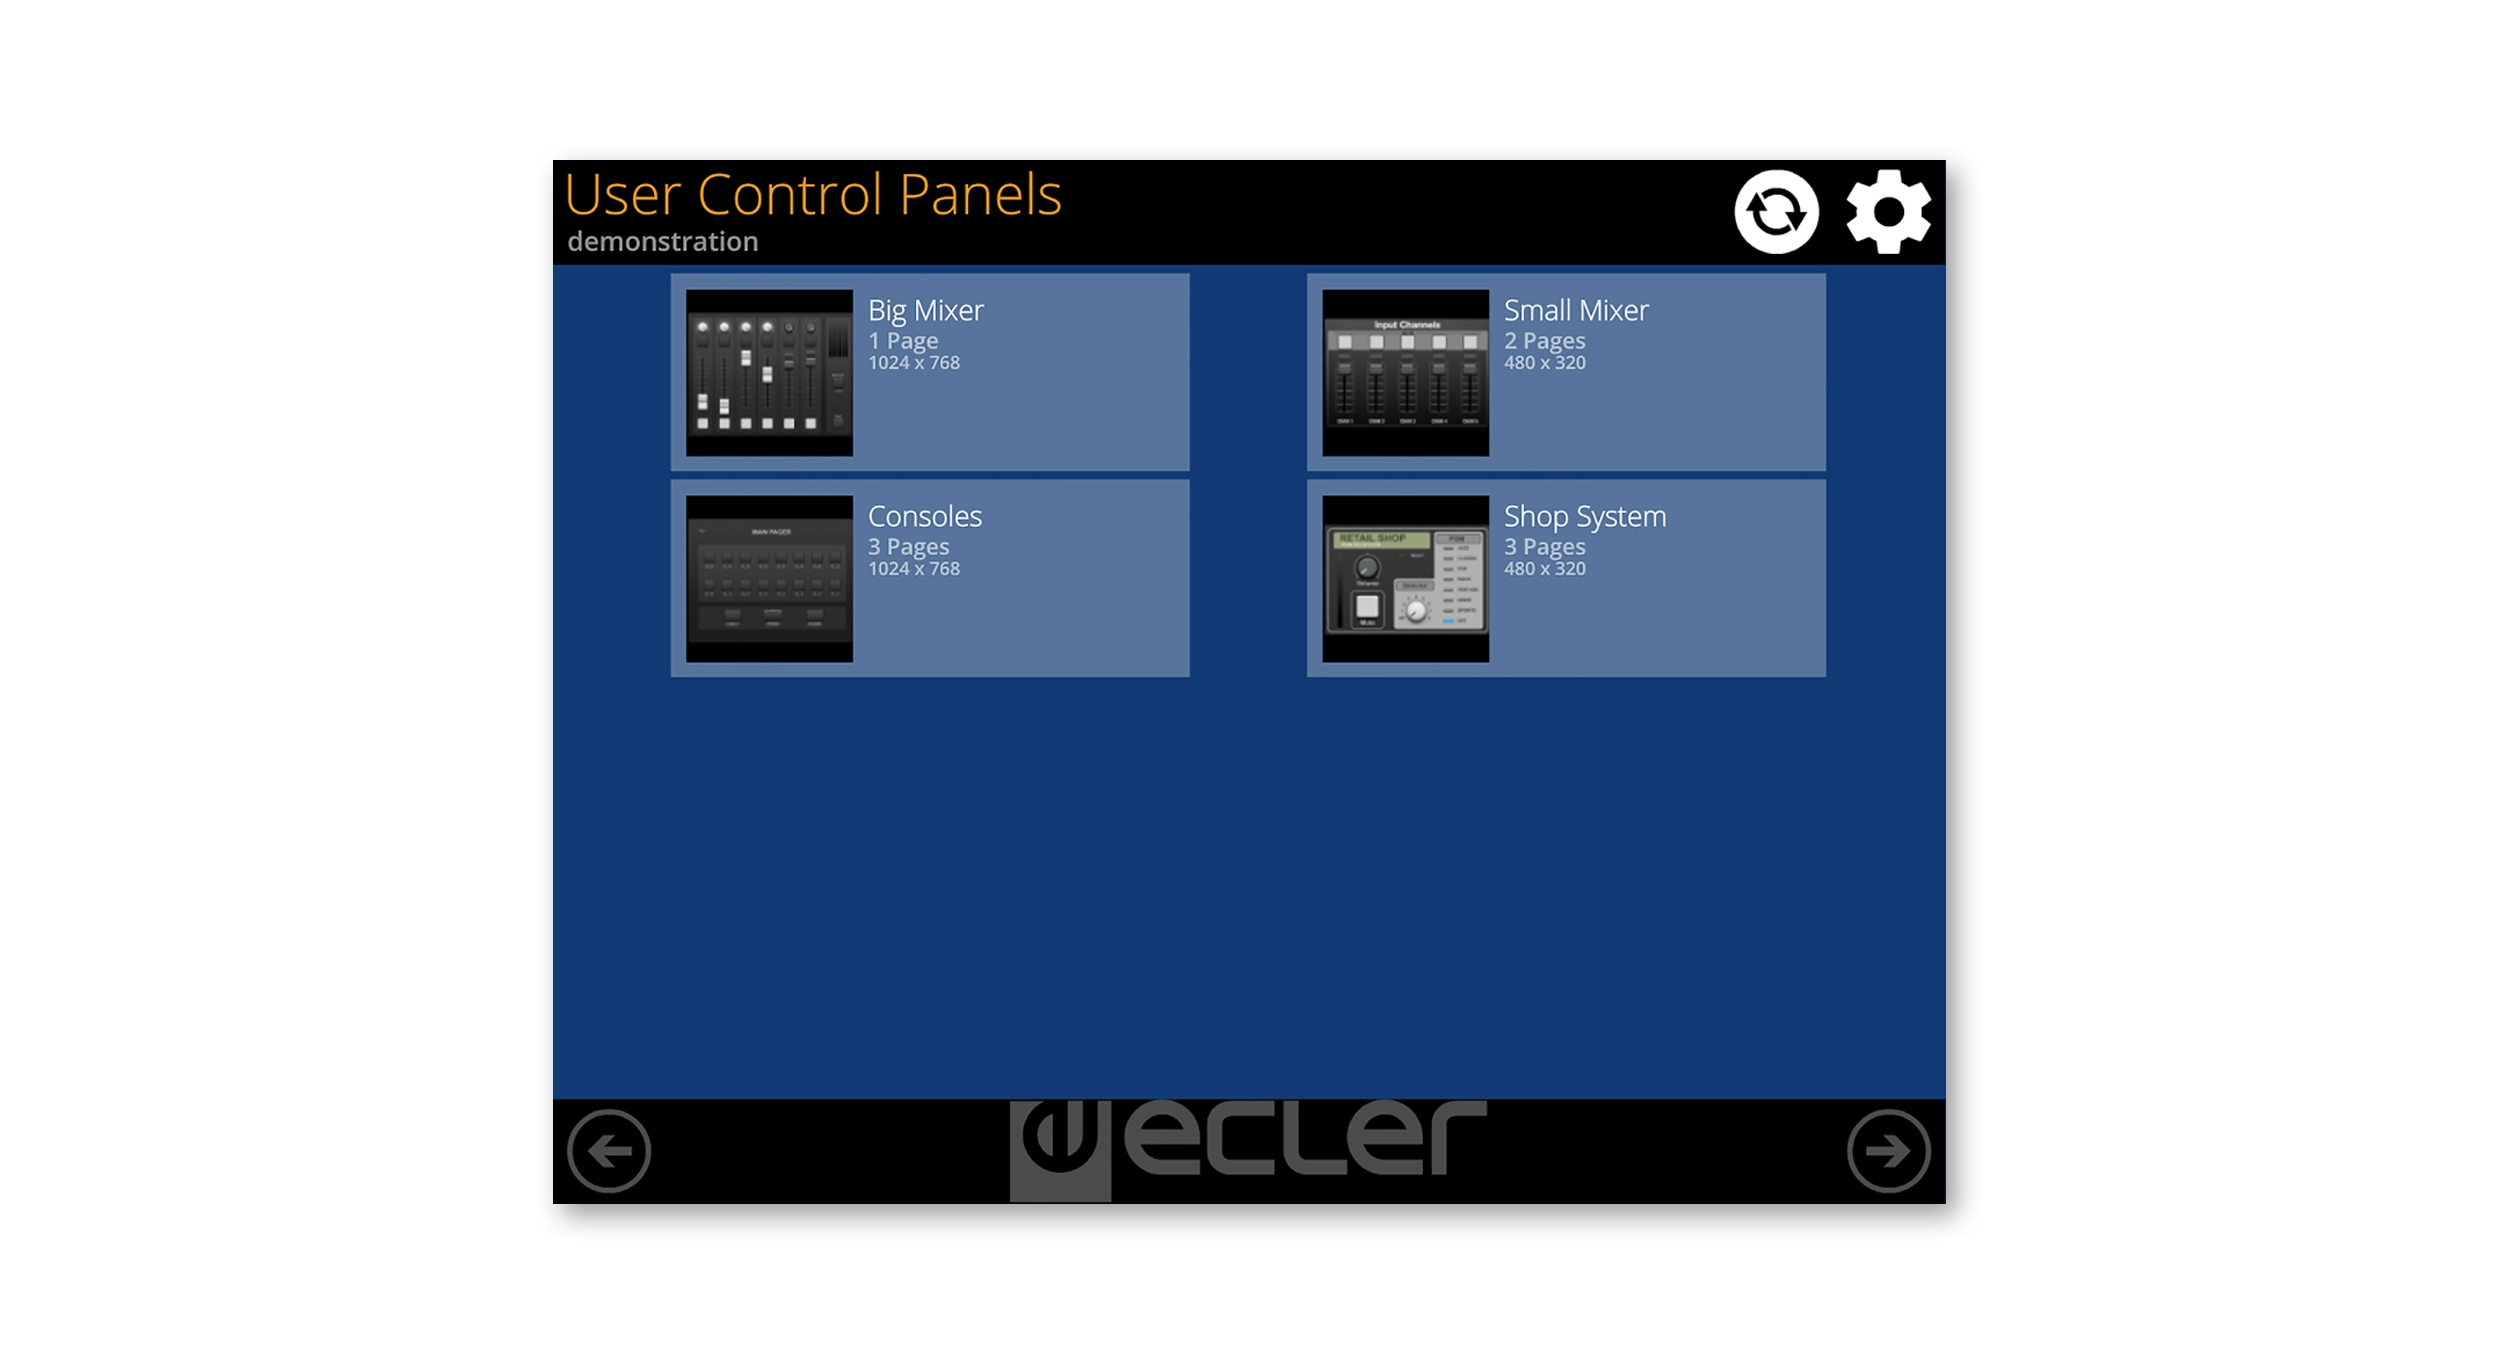 ECLER UCP AppImage 6